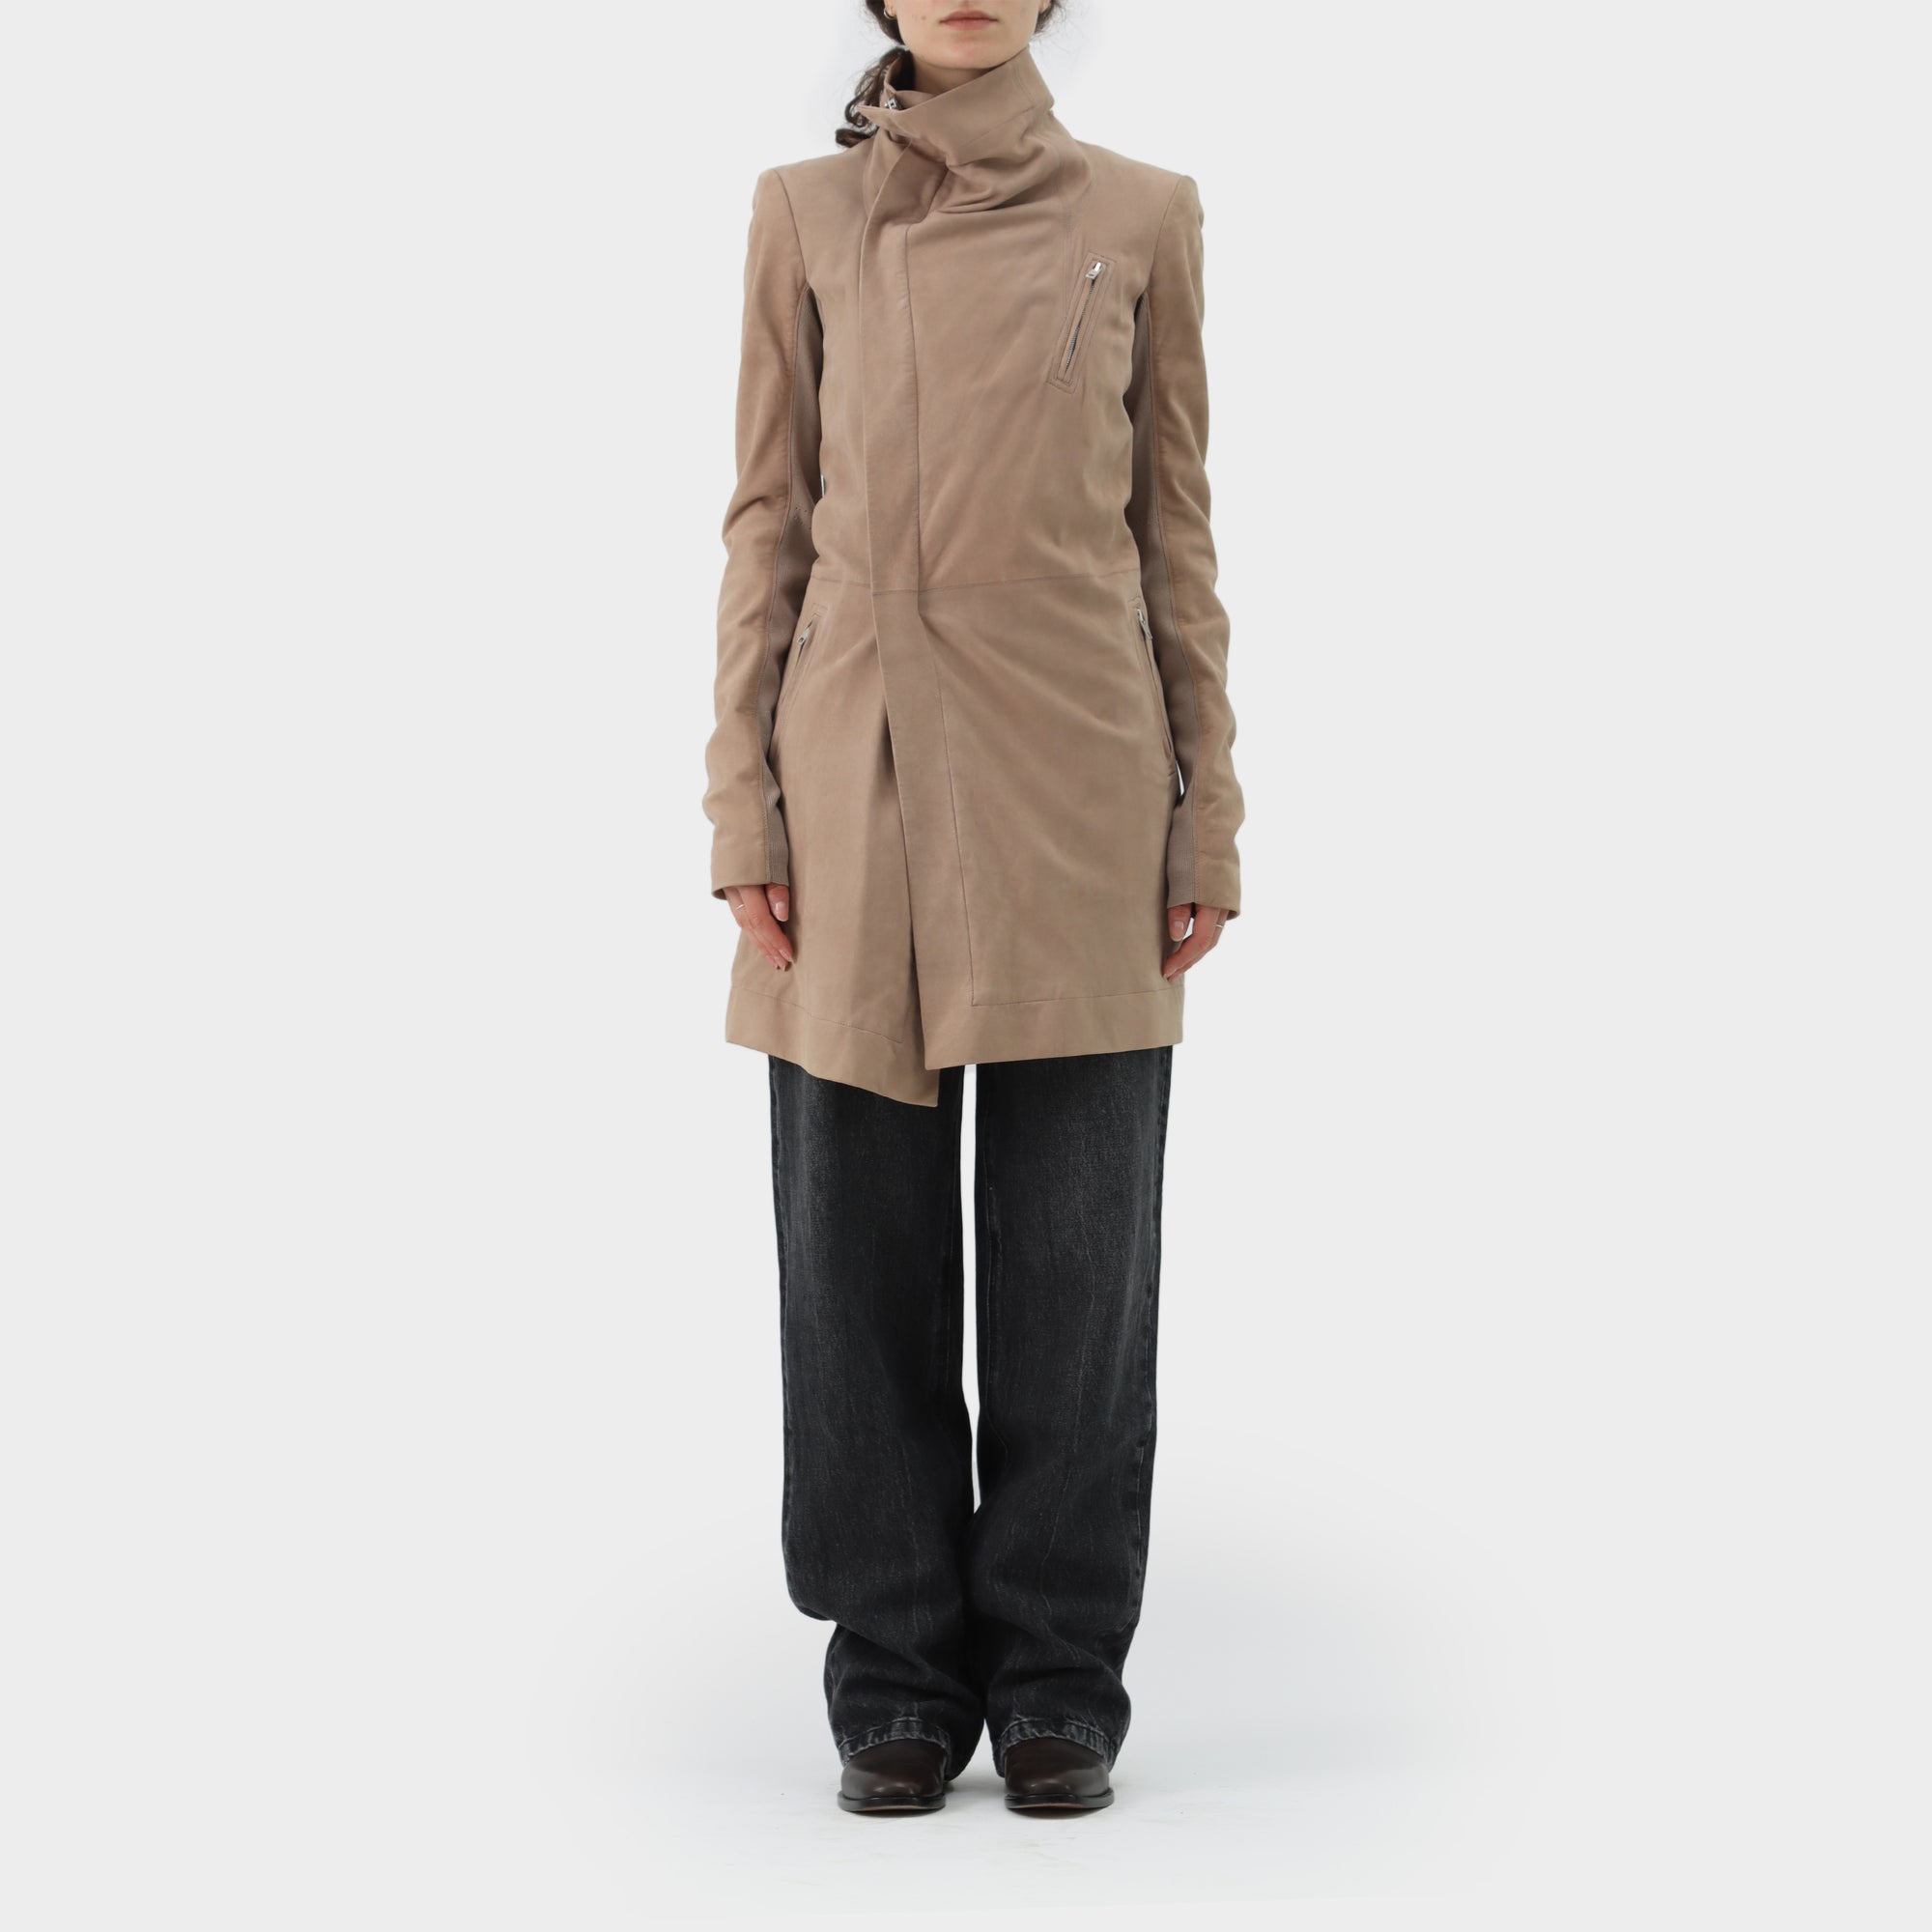 Rick Owens Suede Leather Coat